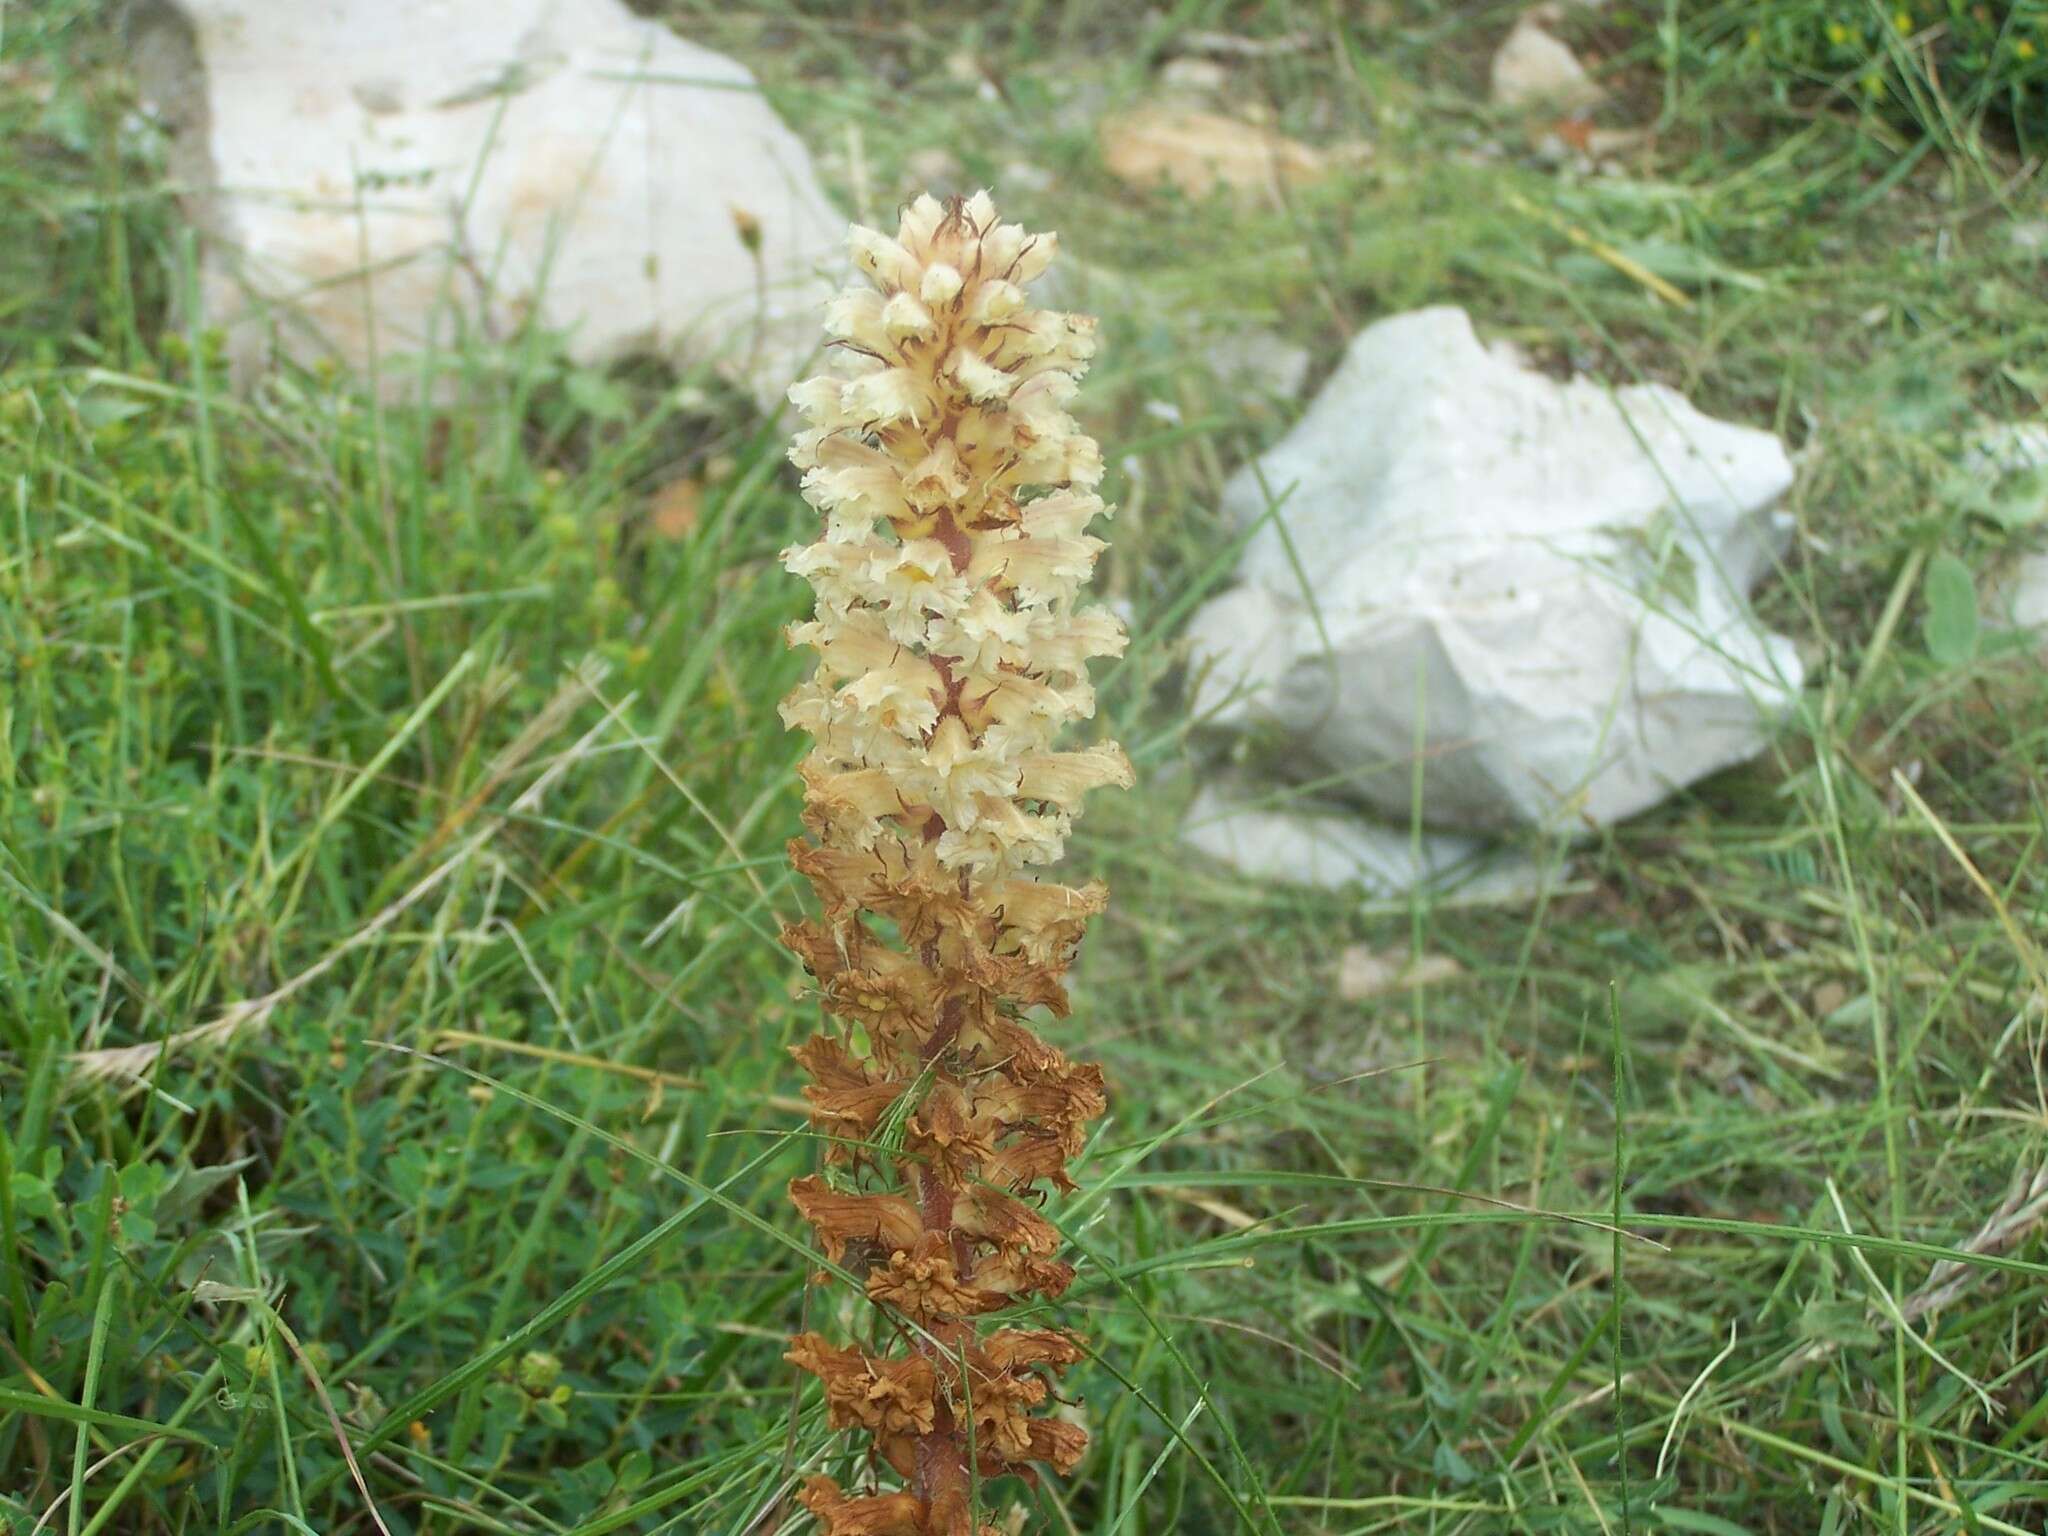 Image of Orobanche amethystea Thuill.